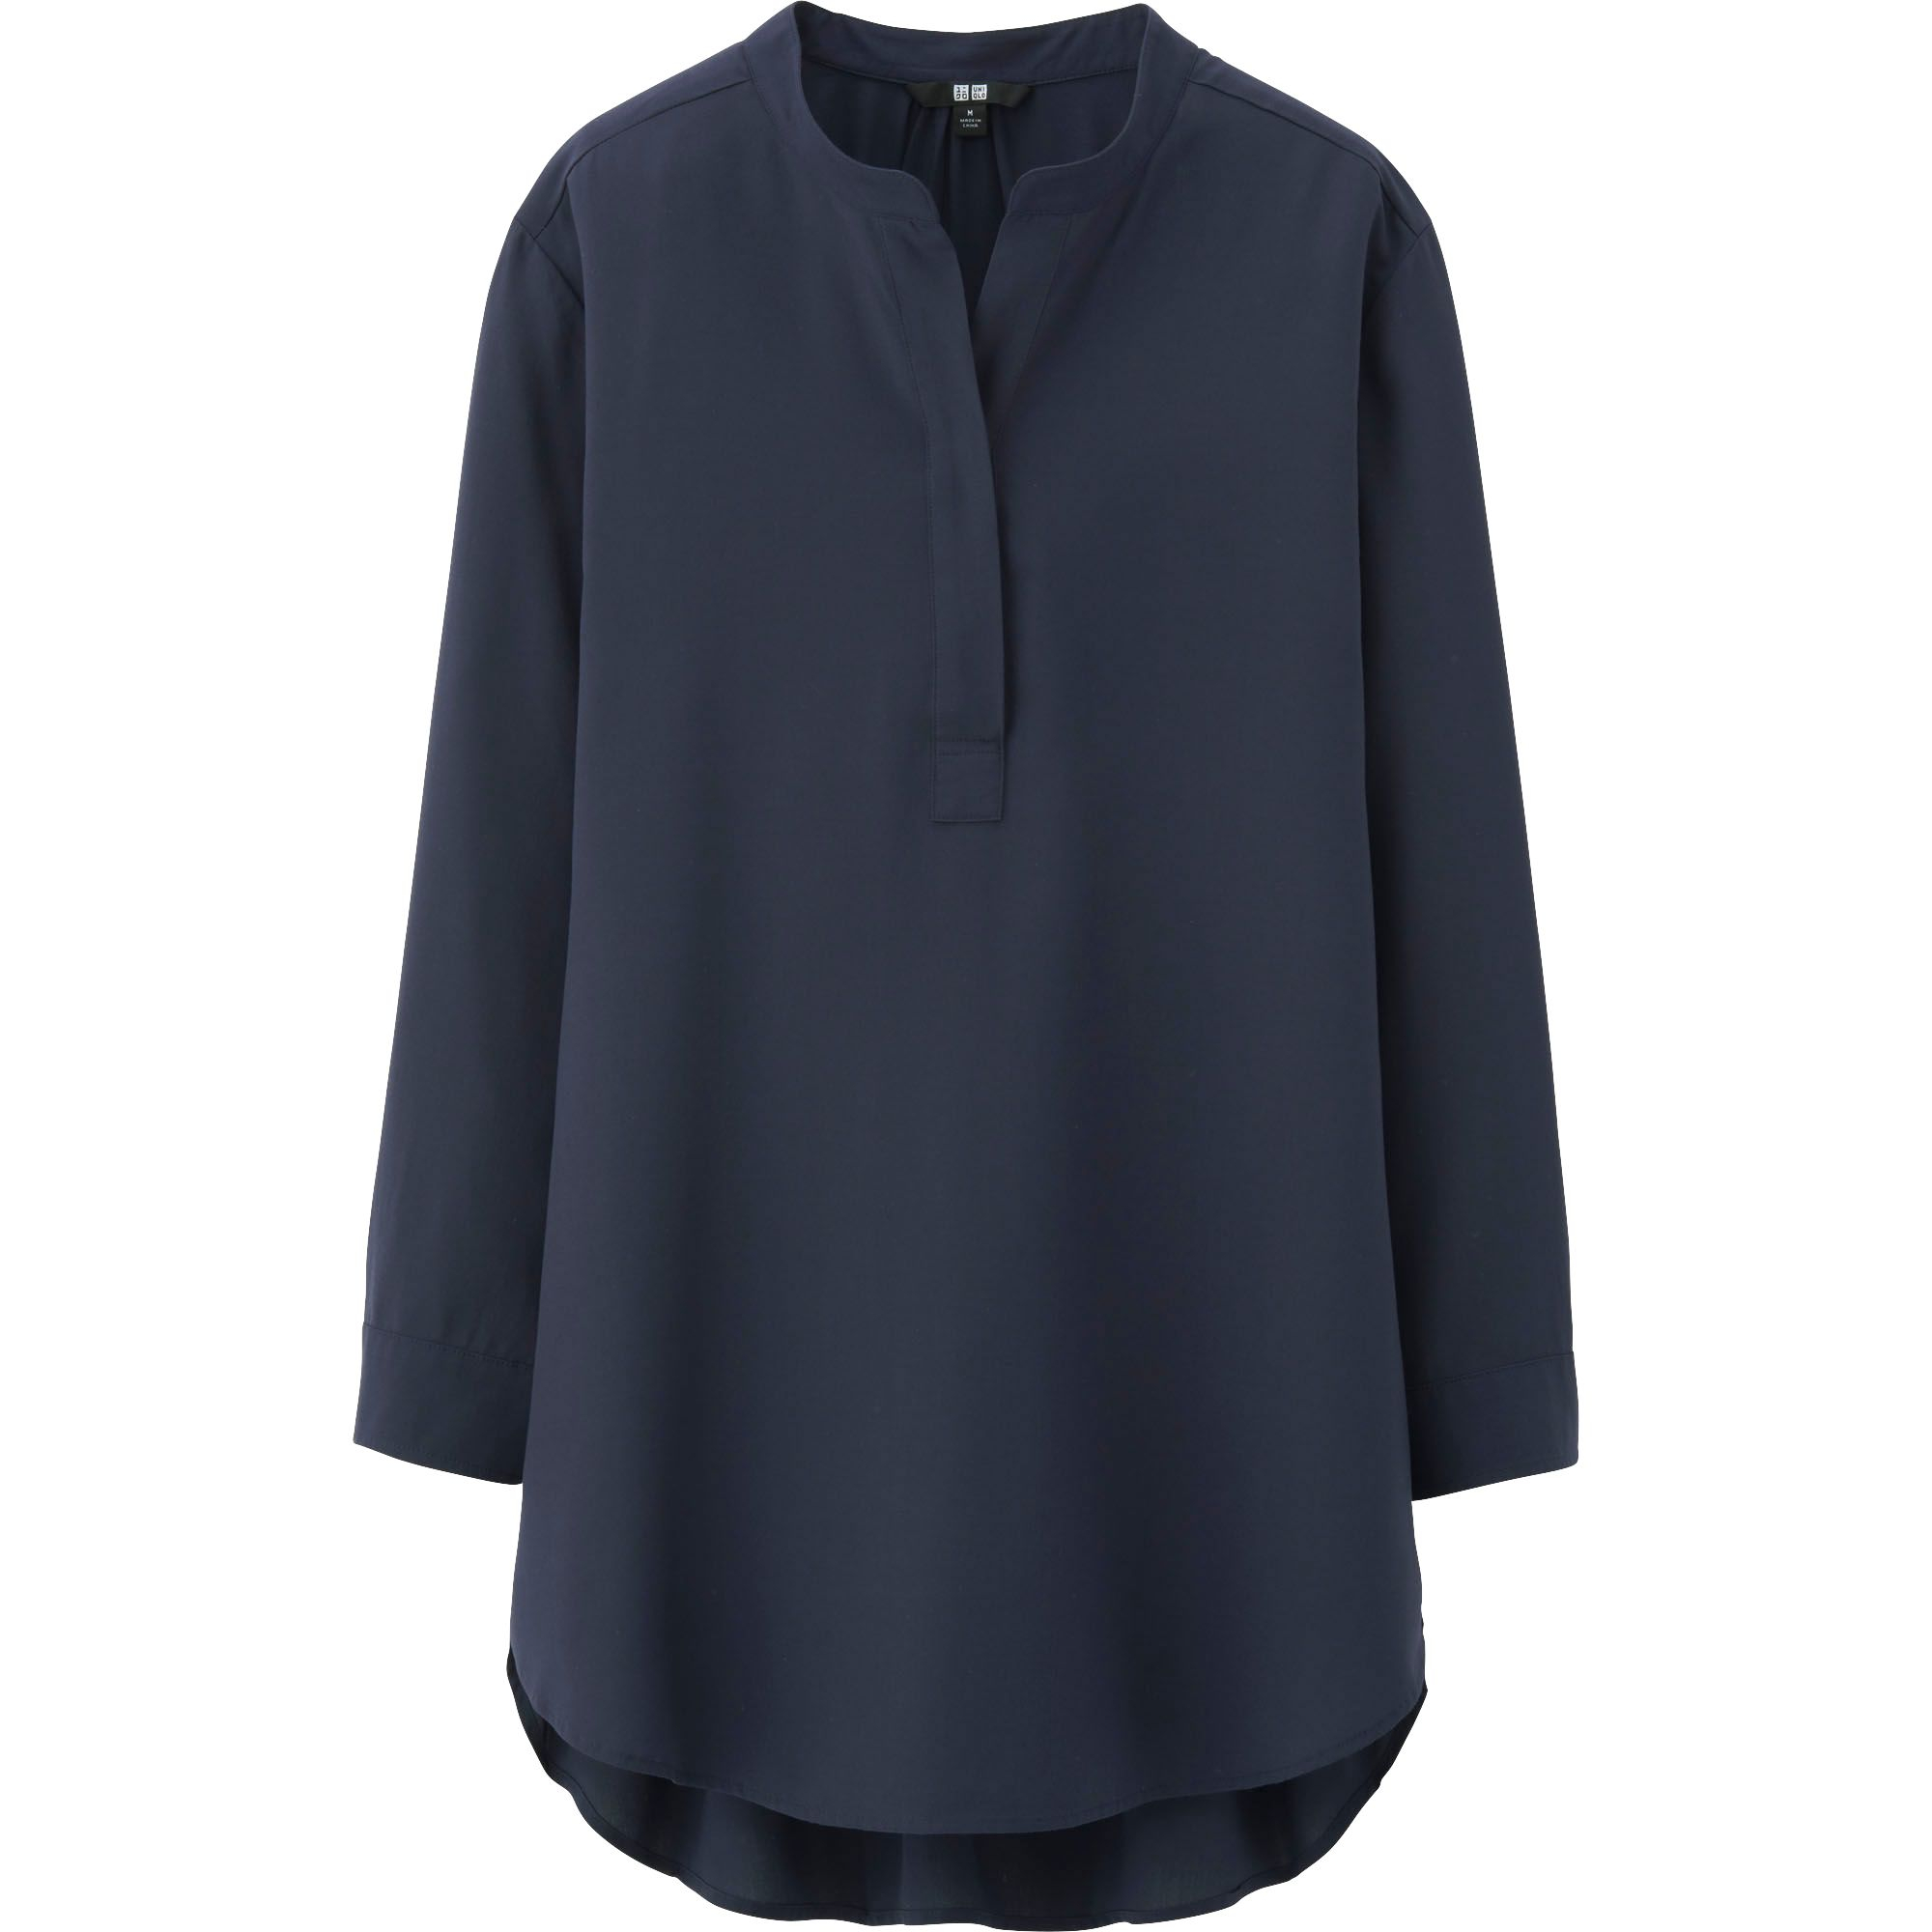 Uniqlo Rayon Stand Collar 34 Sleeve Blouse in Blue (NAVY) | Lyst